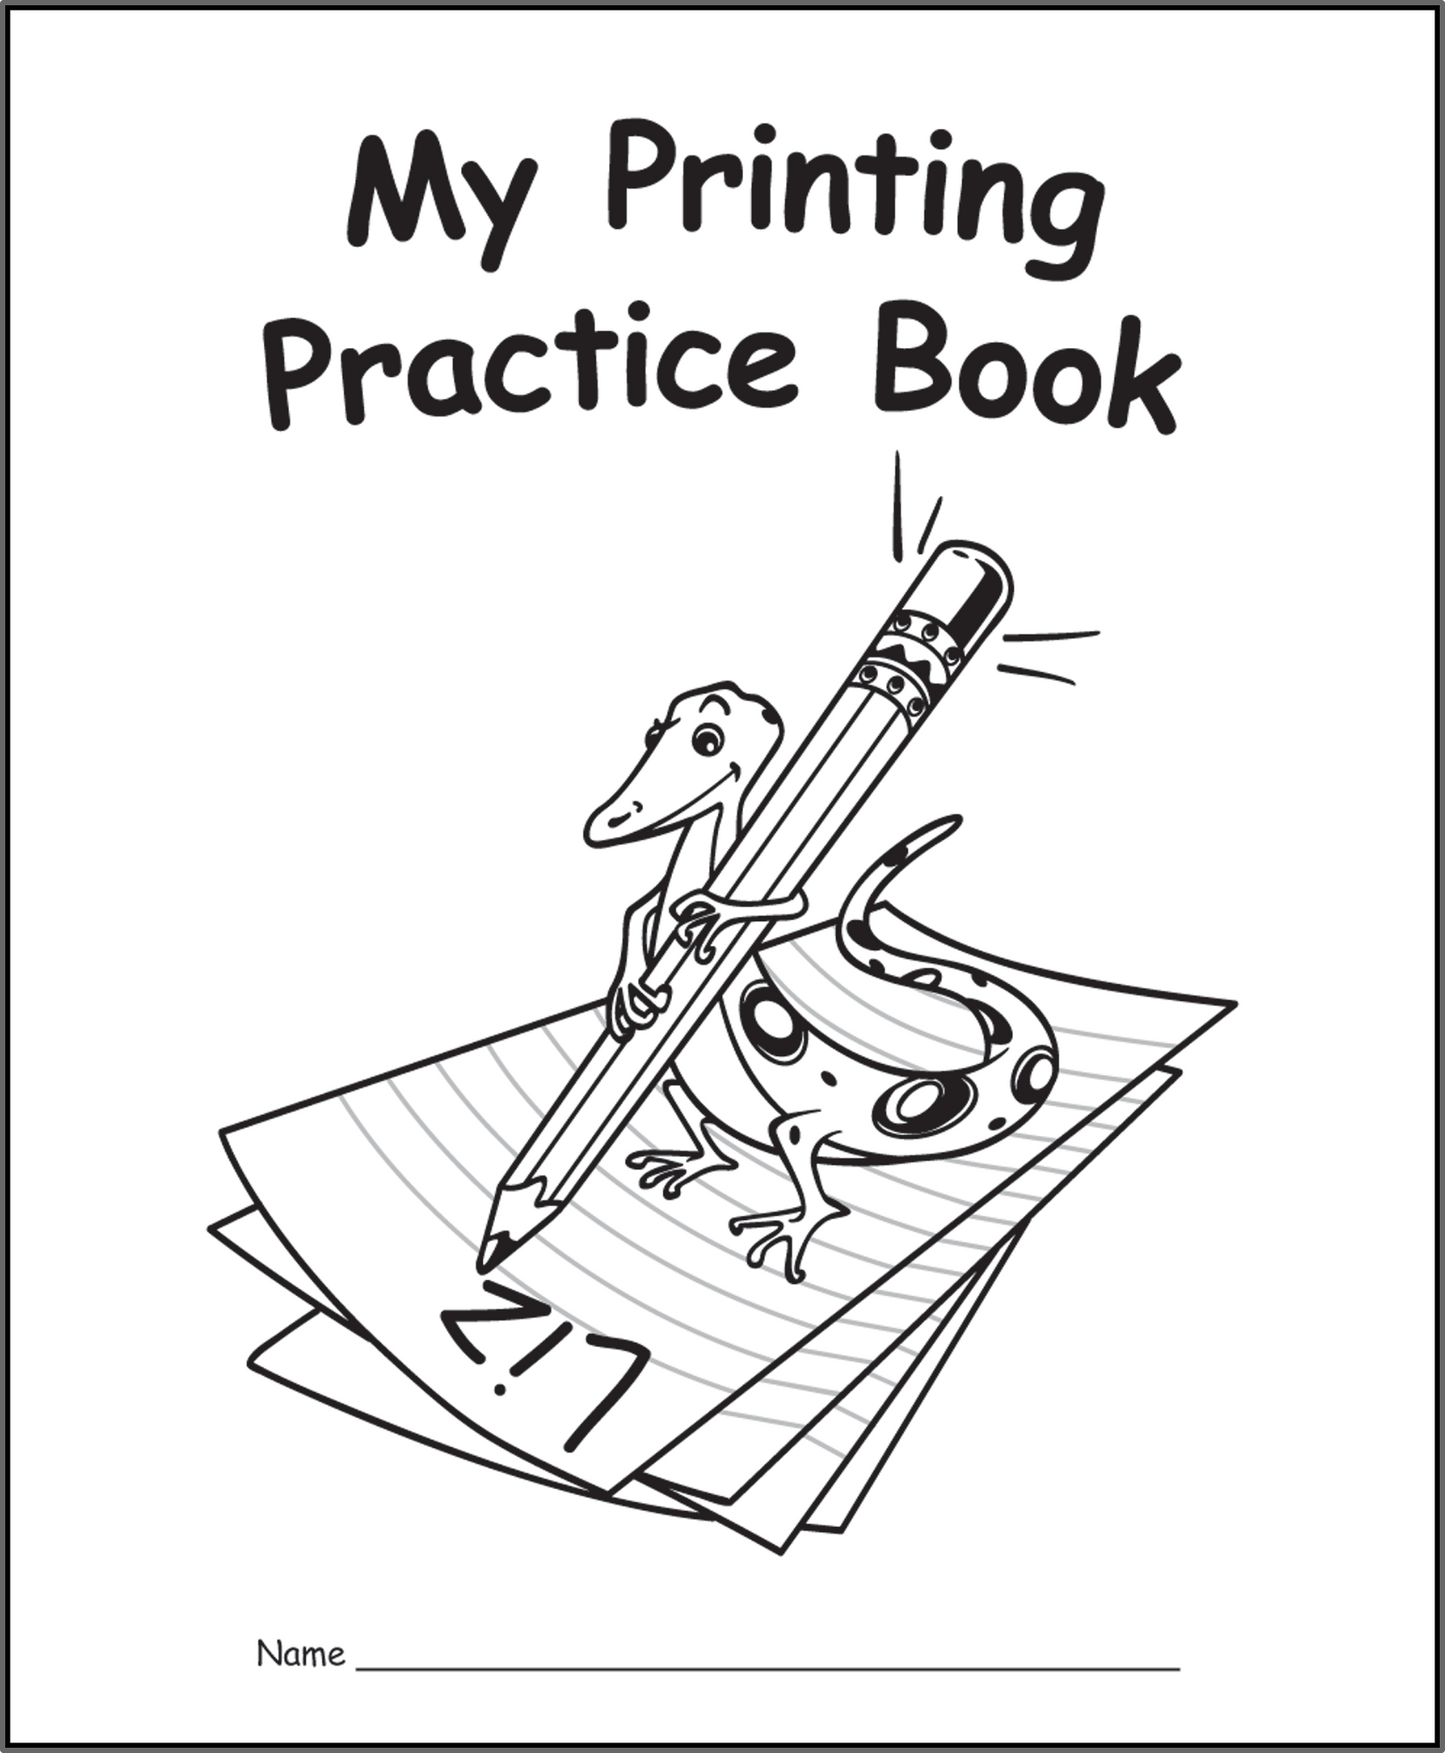 My Own Books: My Printing Practice Book